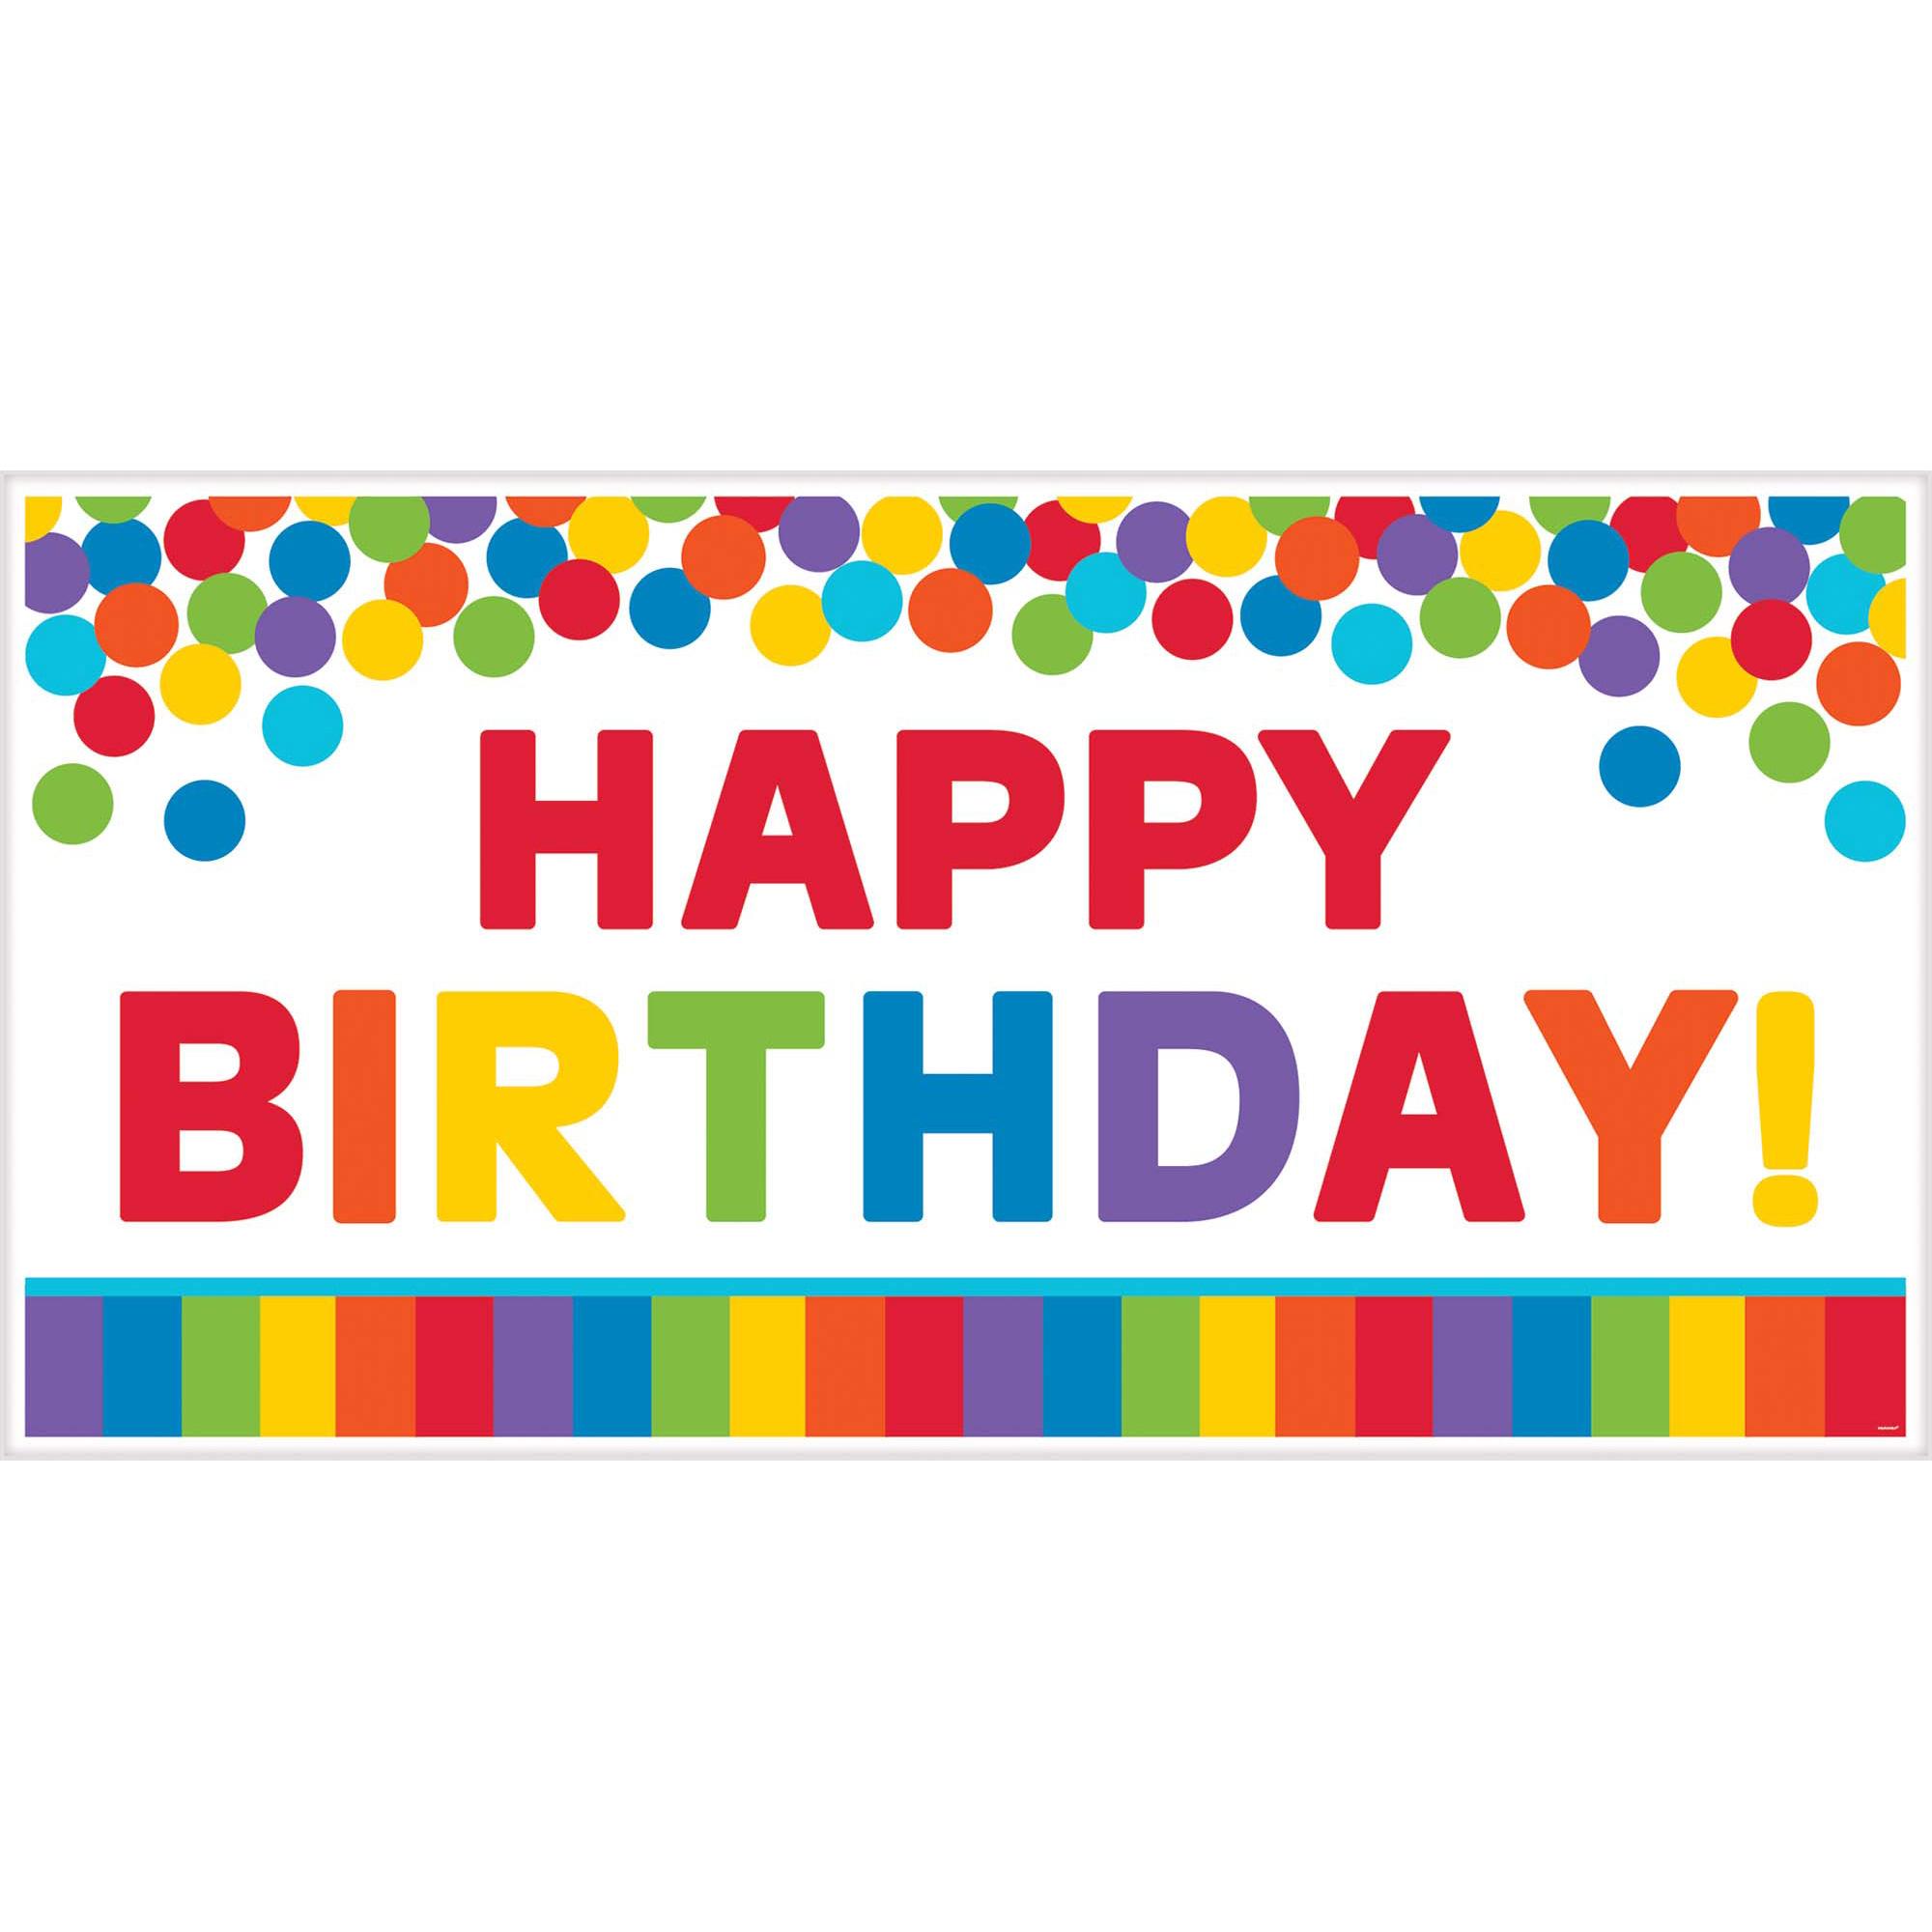 Primary Rainbow Happy Birthday Giant Party Sign Decorations - Party Centre